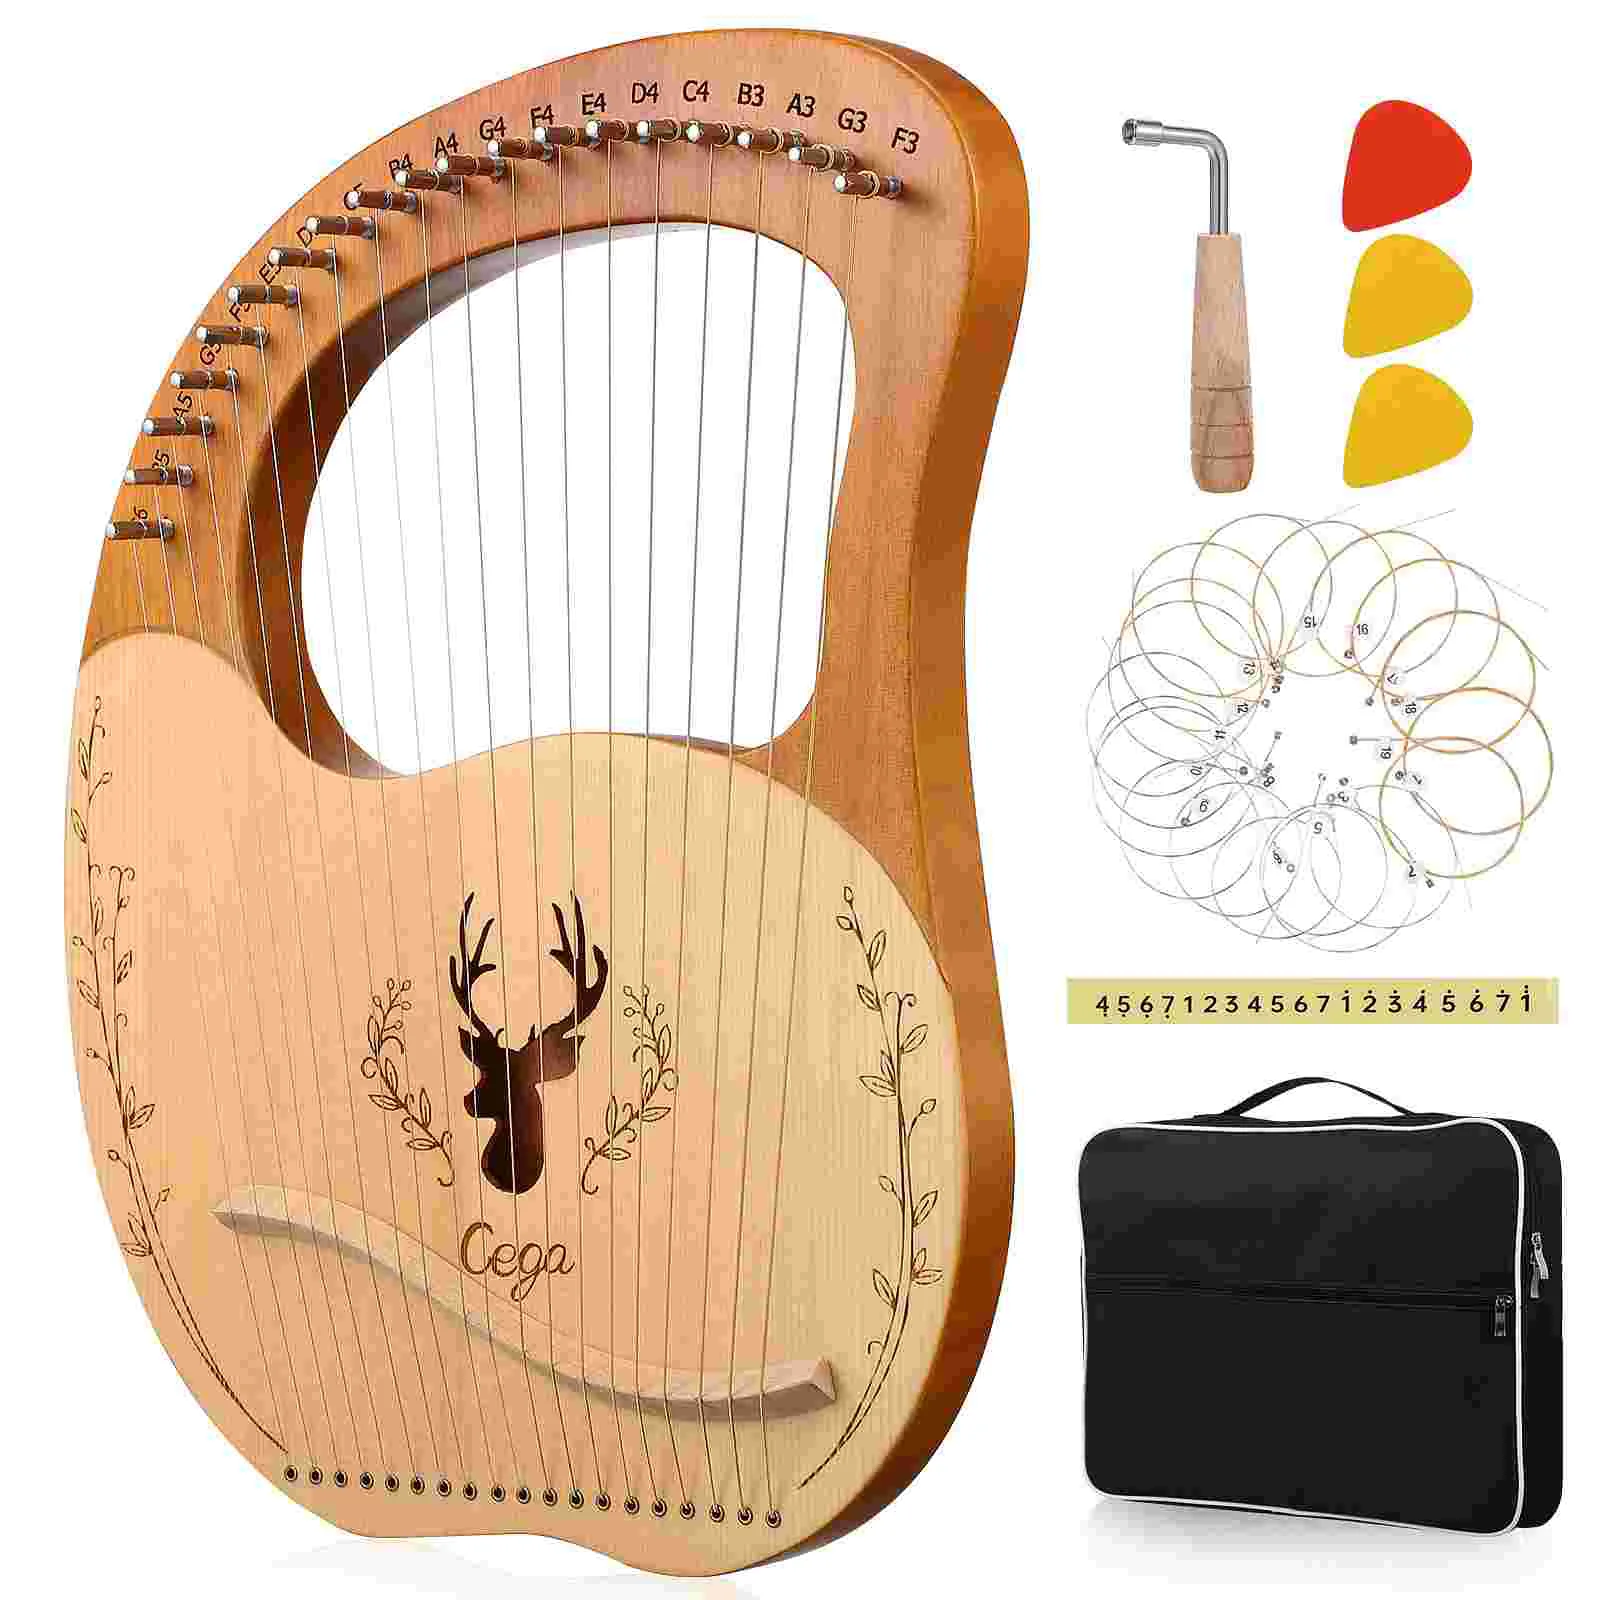 

1 Set Lyre Harp 19 Strings Lyre Harp with Tuning Key Pull Out Strings Bag Musical Instrument for Beginners